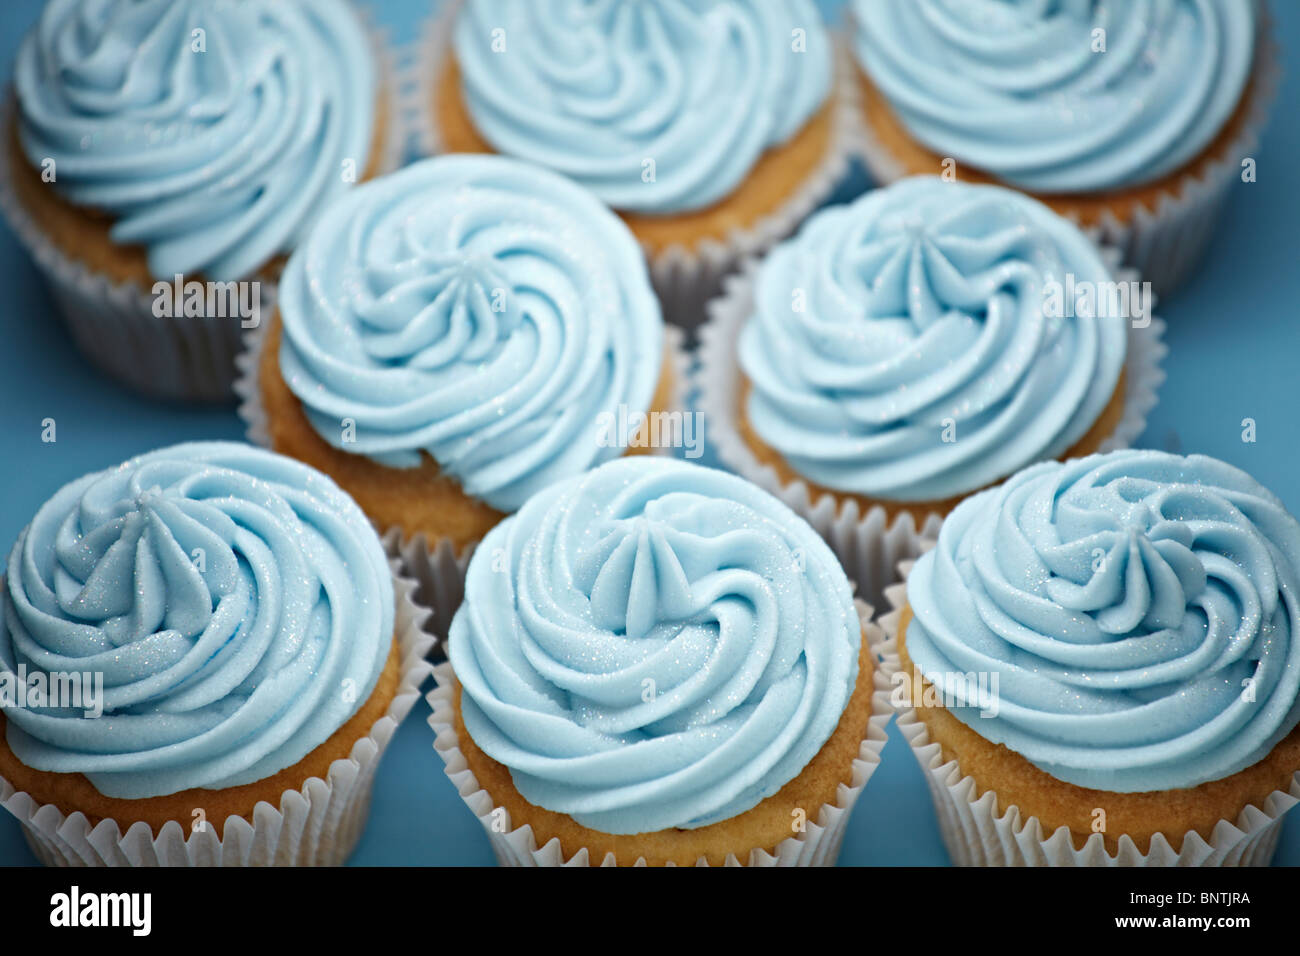 Cupcakes arranged for a party or a wedding reception Stock Photo